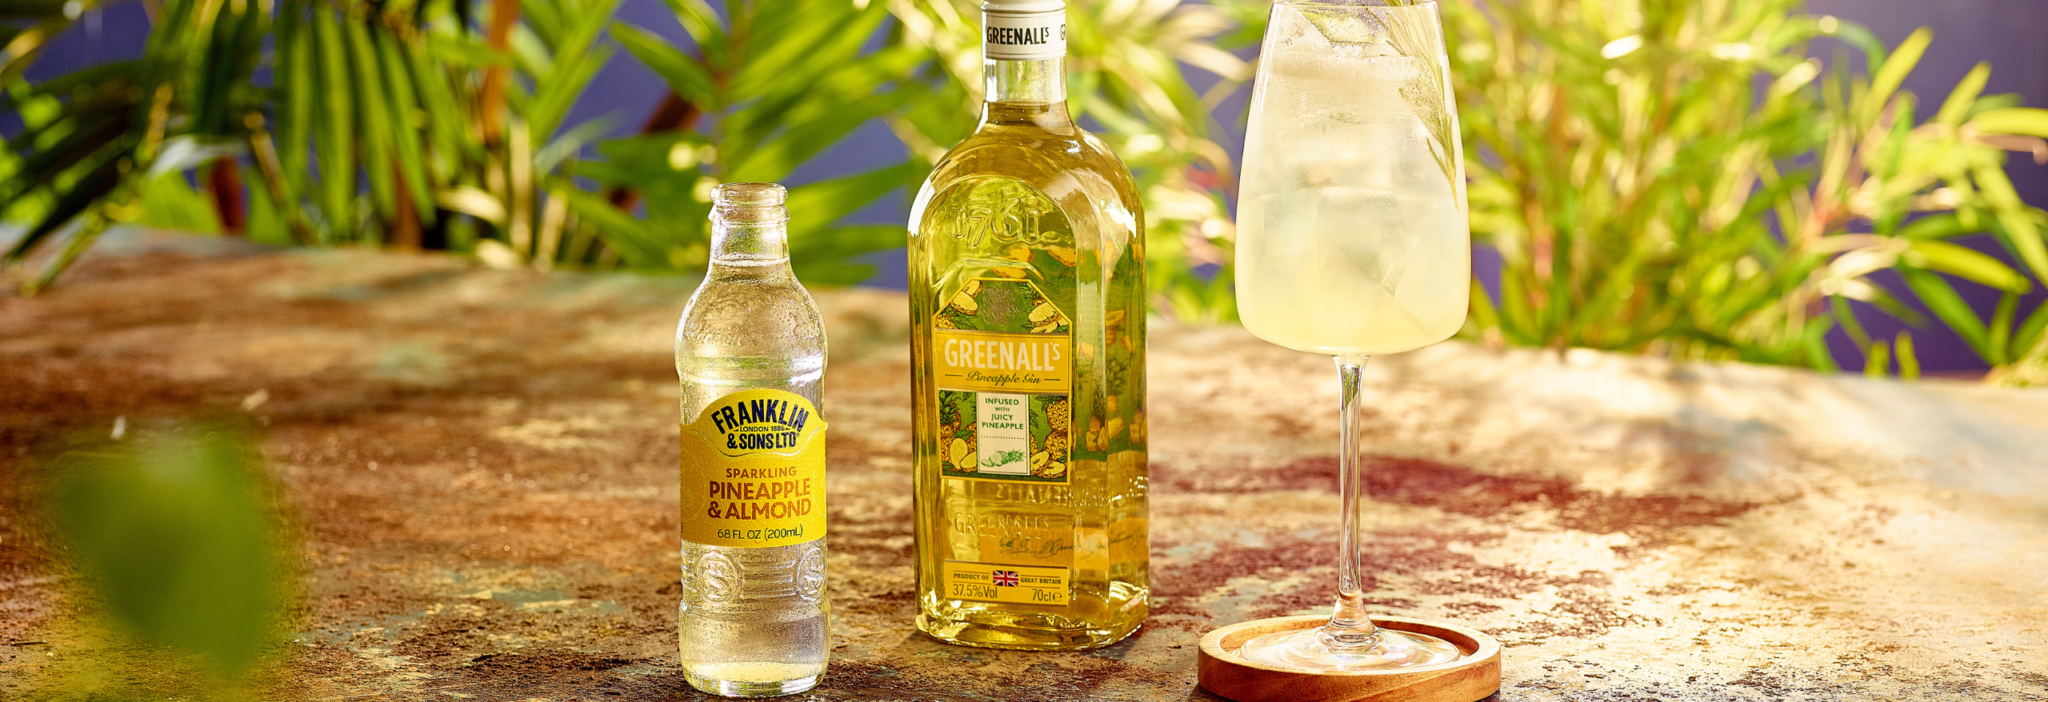 Pineapple Spritz cocktail recipe next to Franklin & Sons Sparkling Pineapple & Almond | Franklin & Sons US